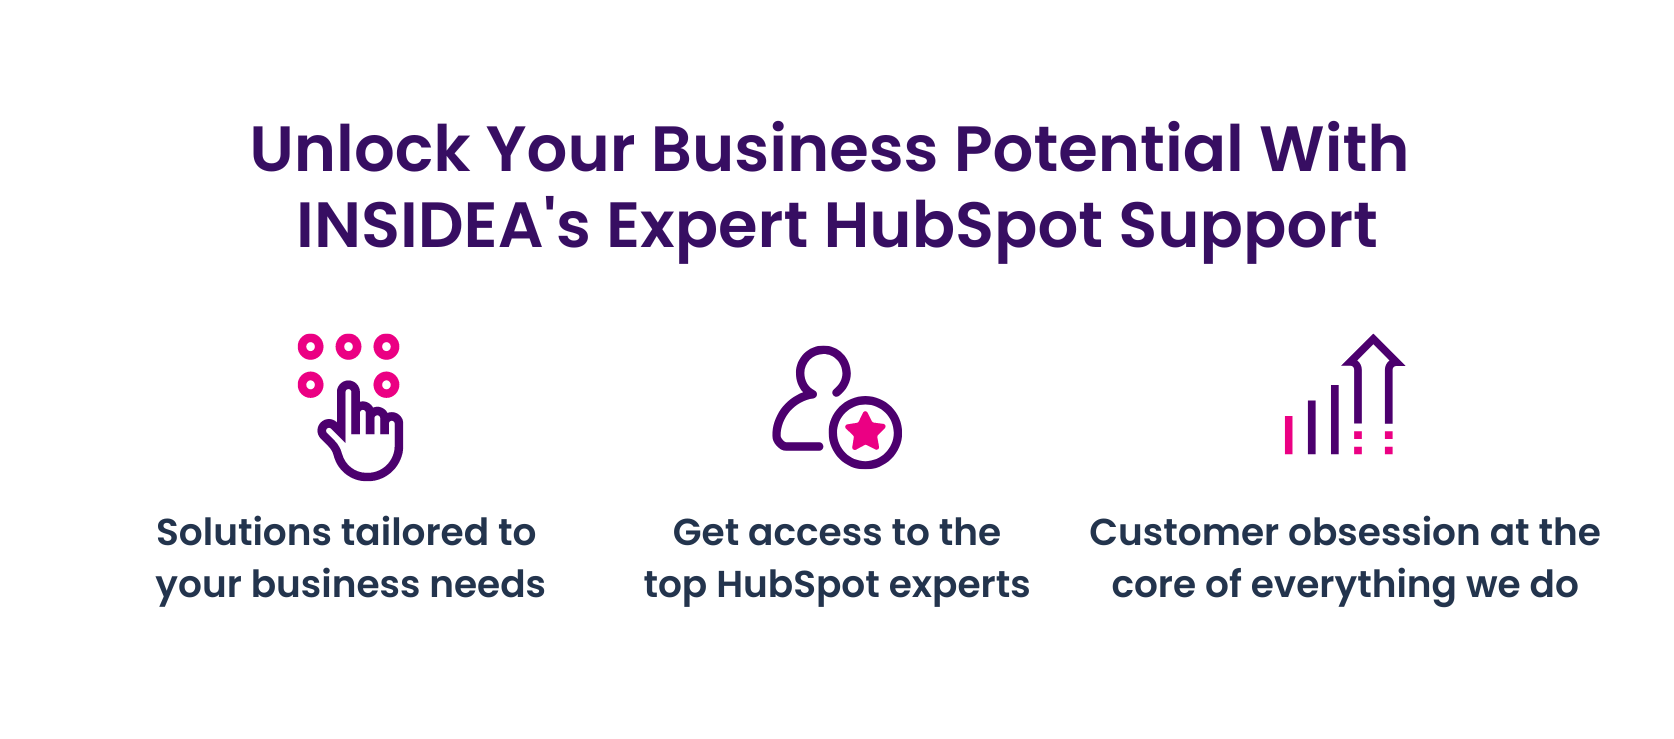 Unlock you business potential with INSIDEA'S expert hubspot support